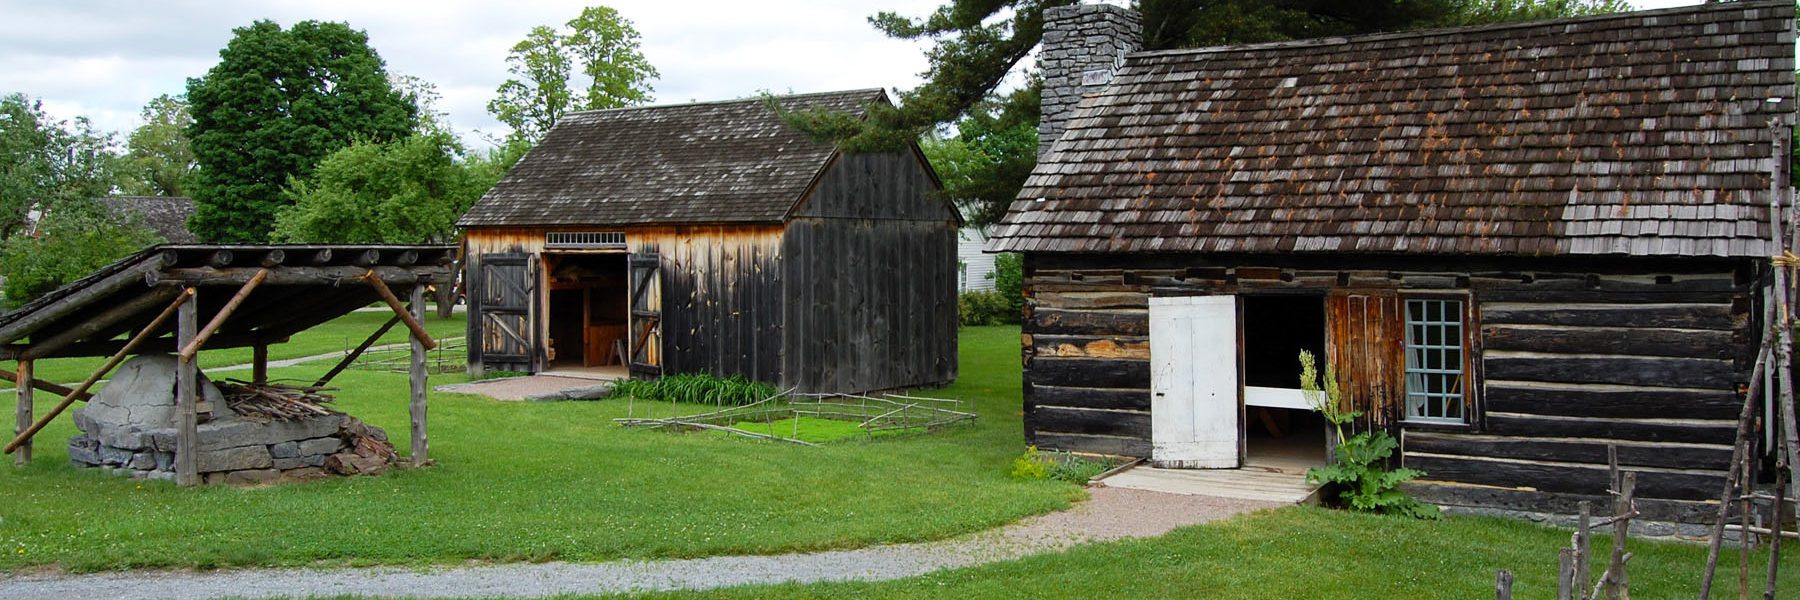 Settlers’ House and Barn